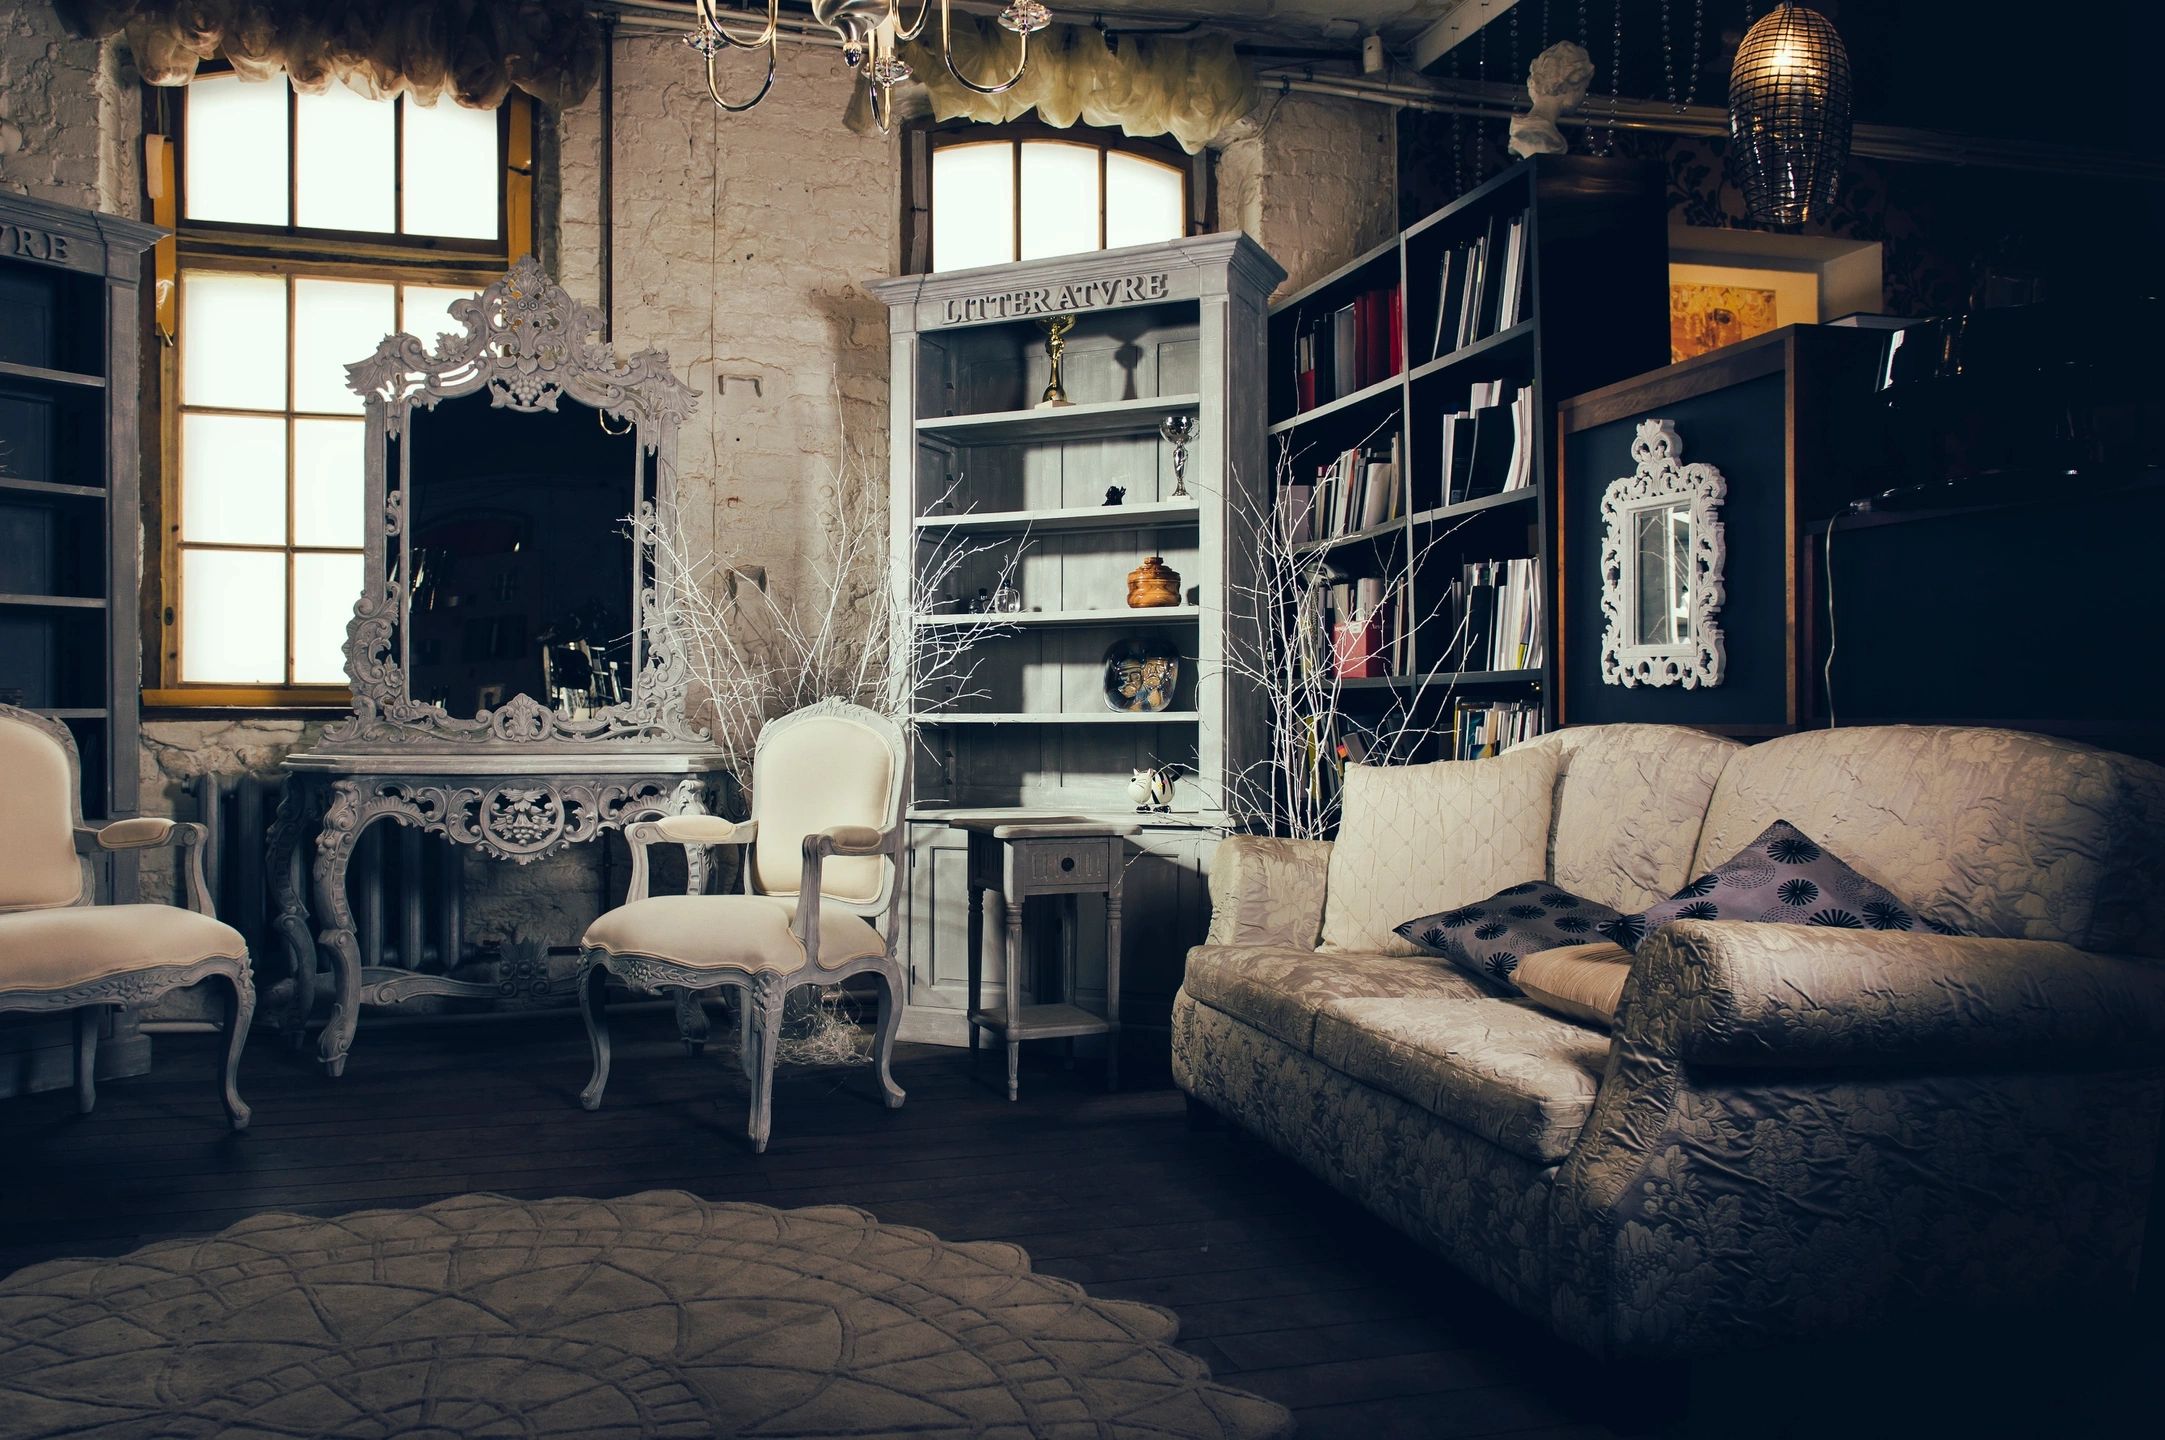 A photo of a room filled with antique bookshelves and wood furniture, a white antique armchair, and an upholstered couch.